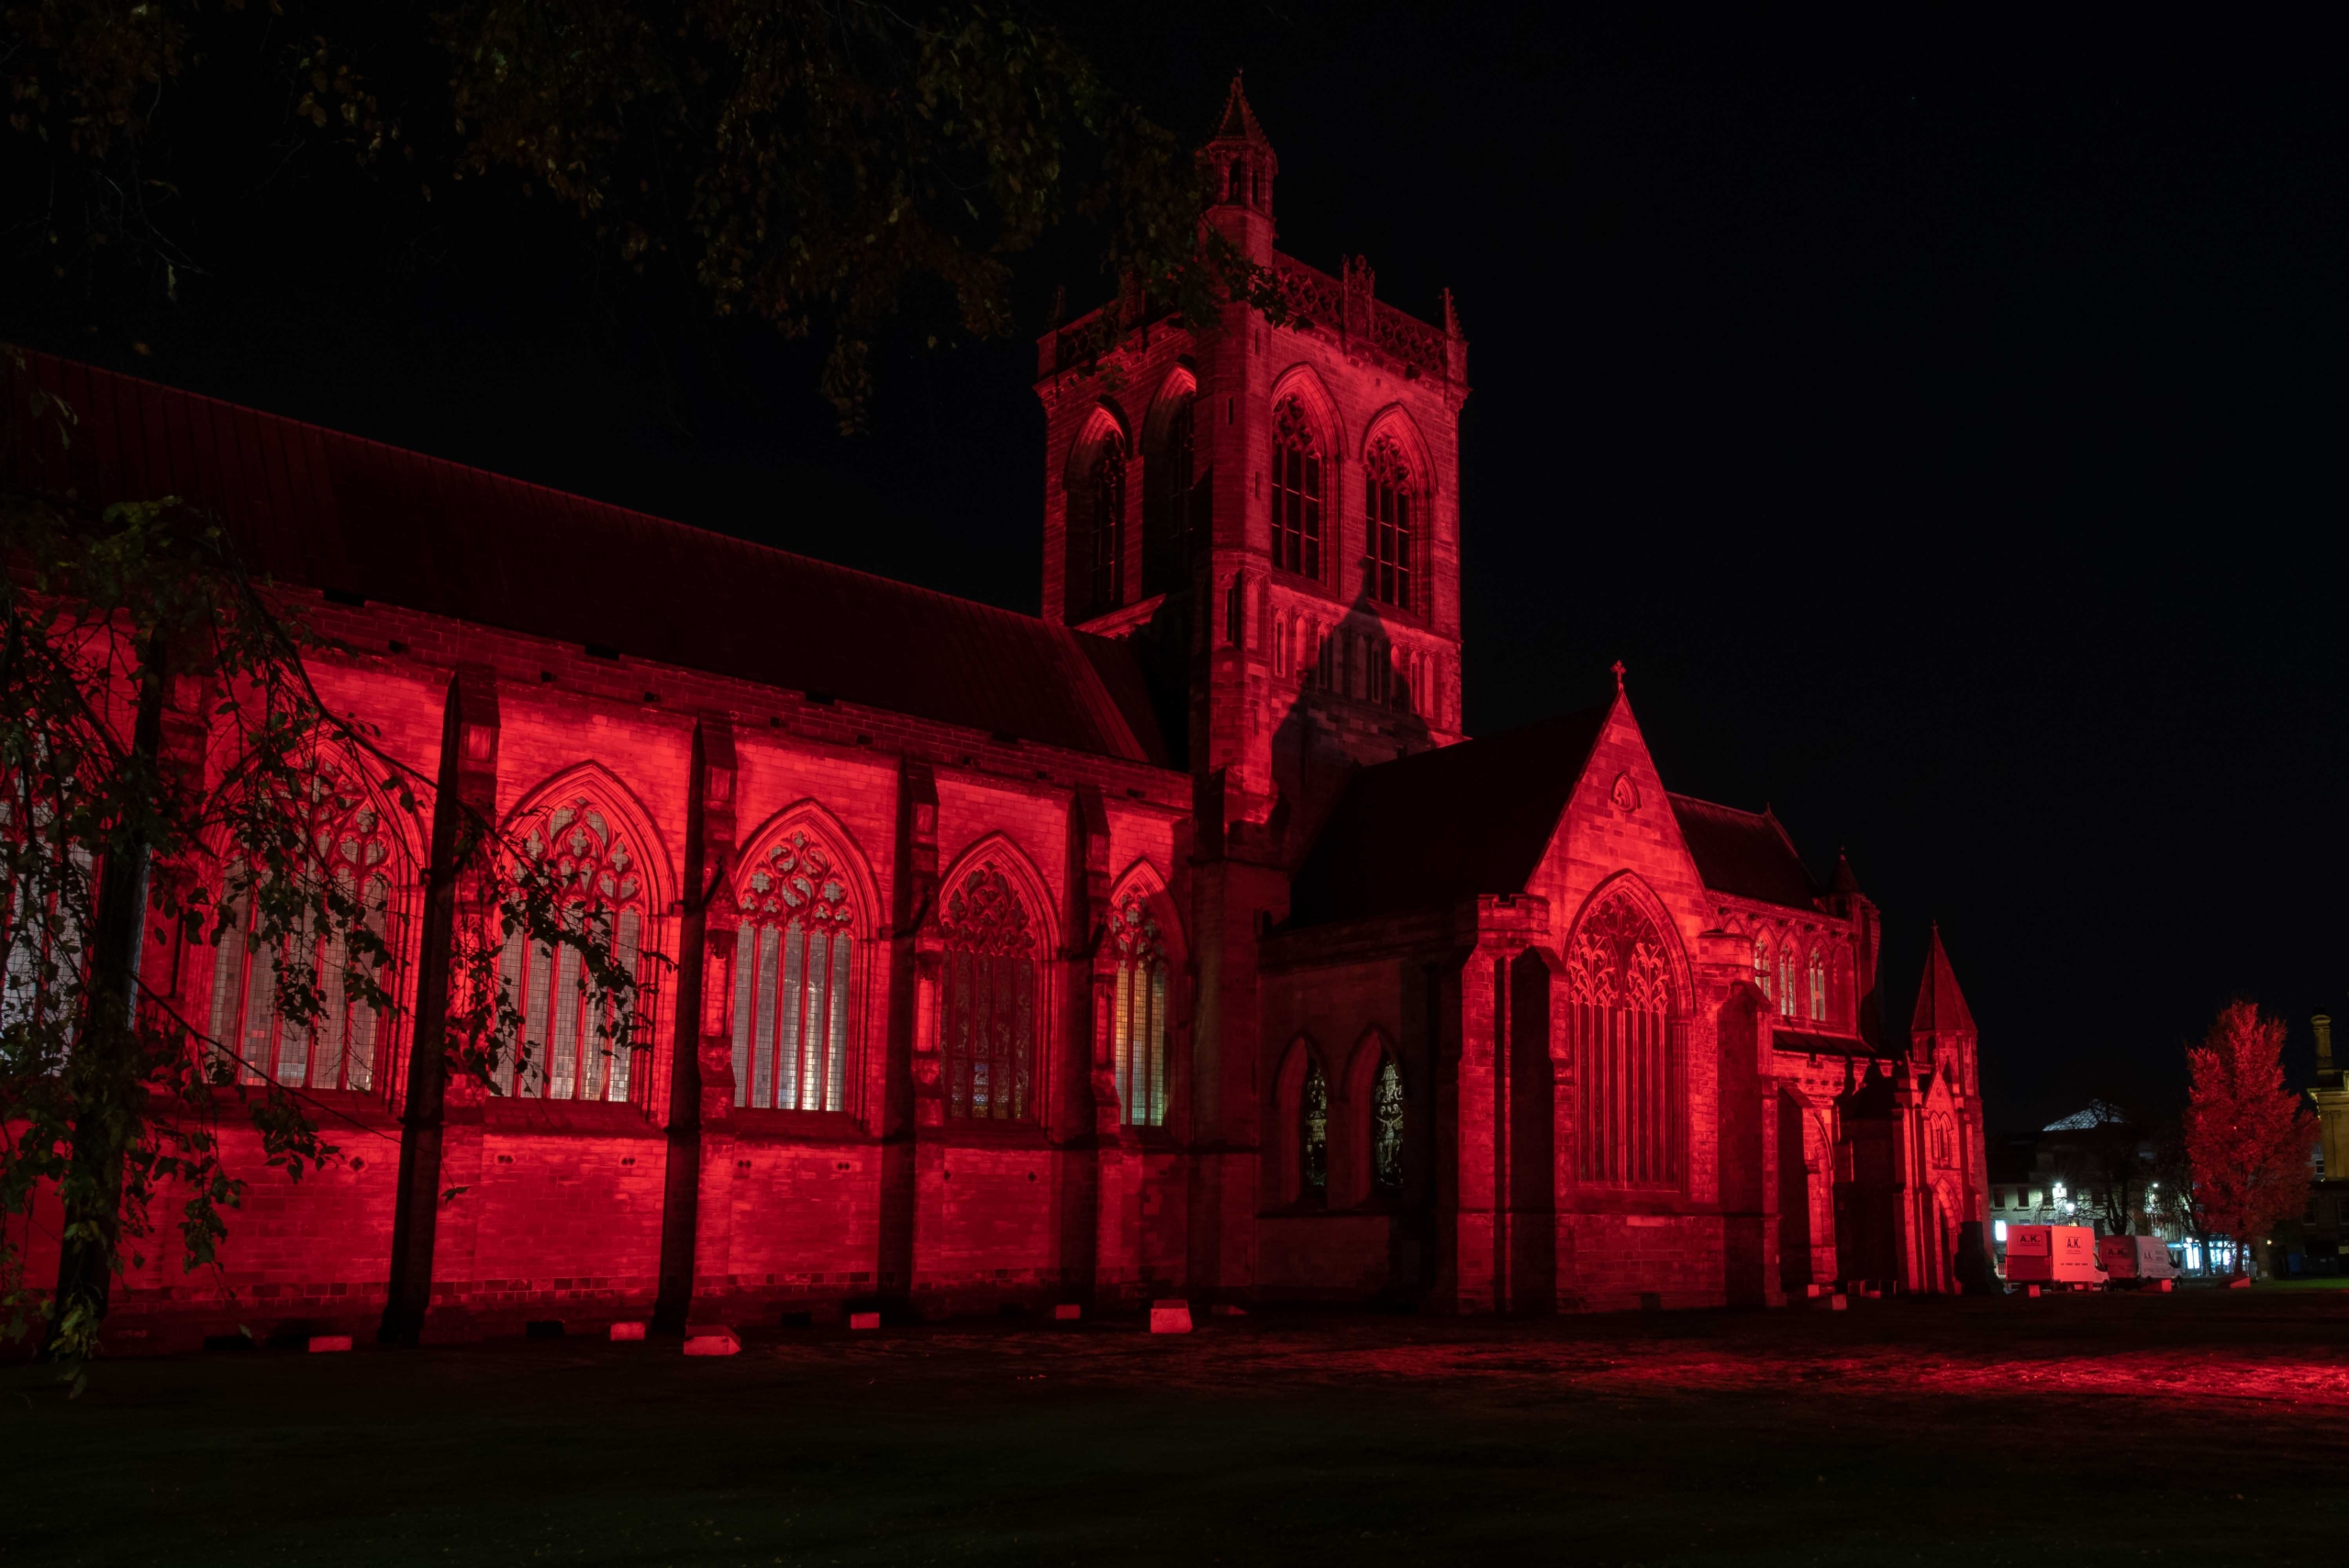 Pasiley Abbey lit up in red